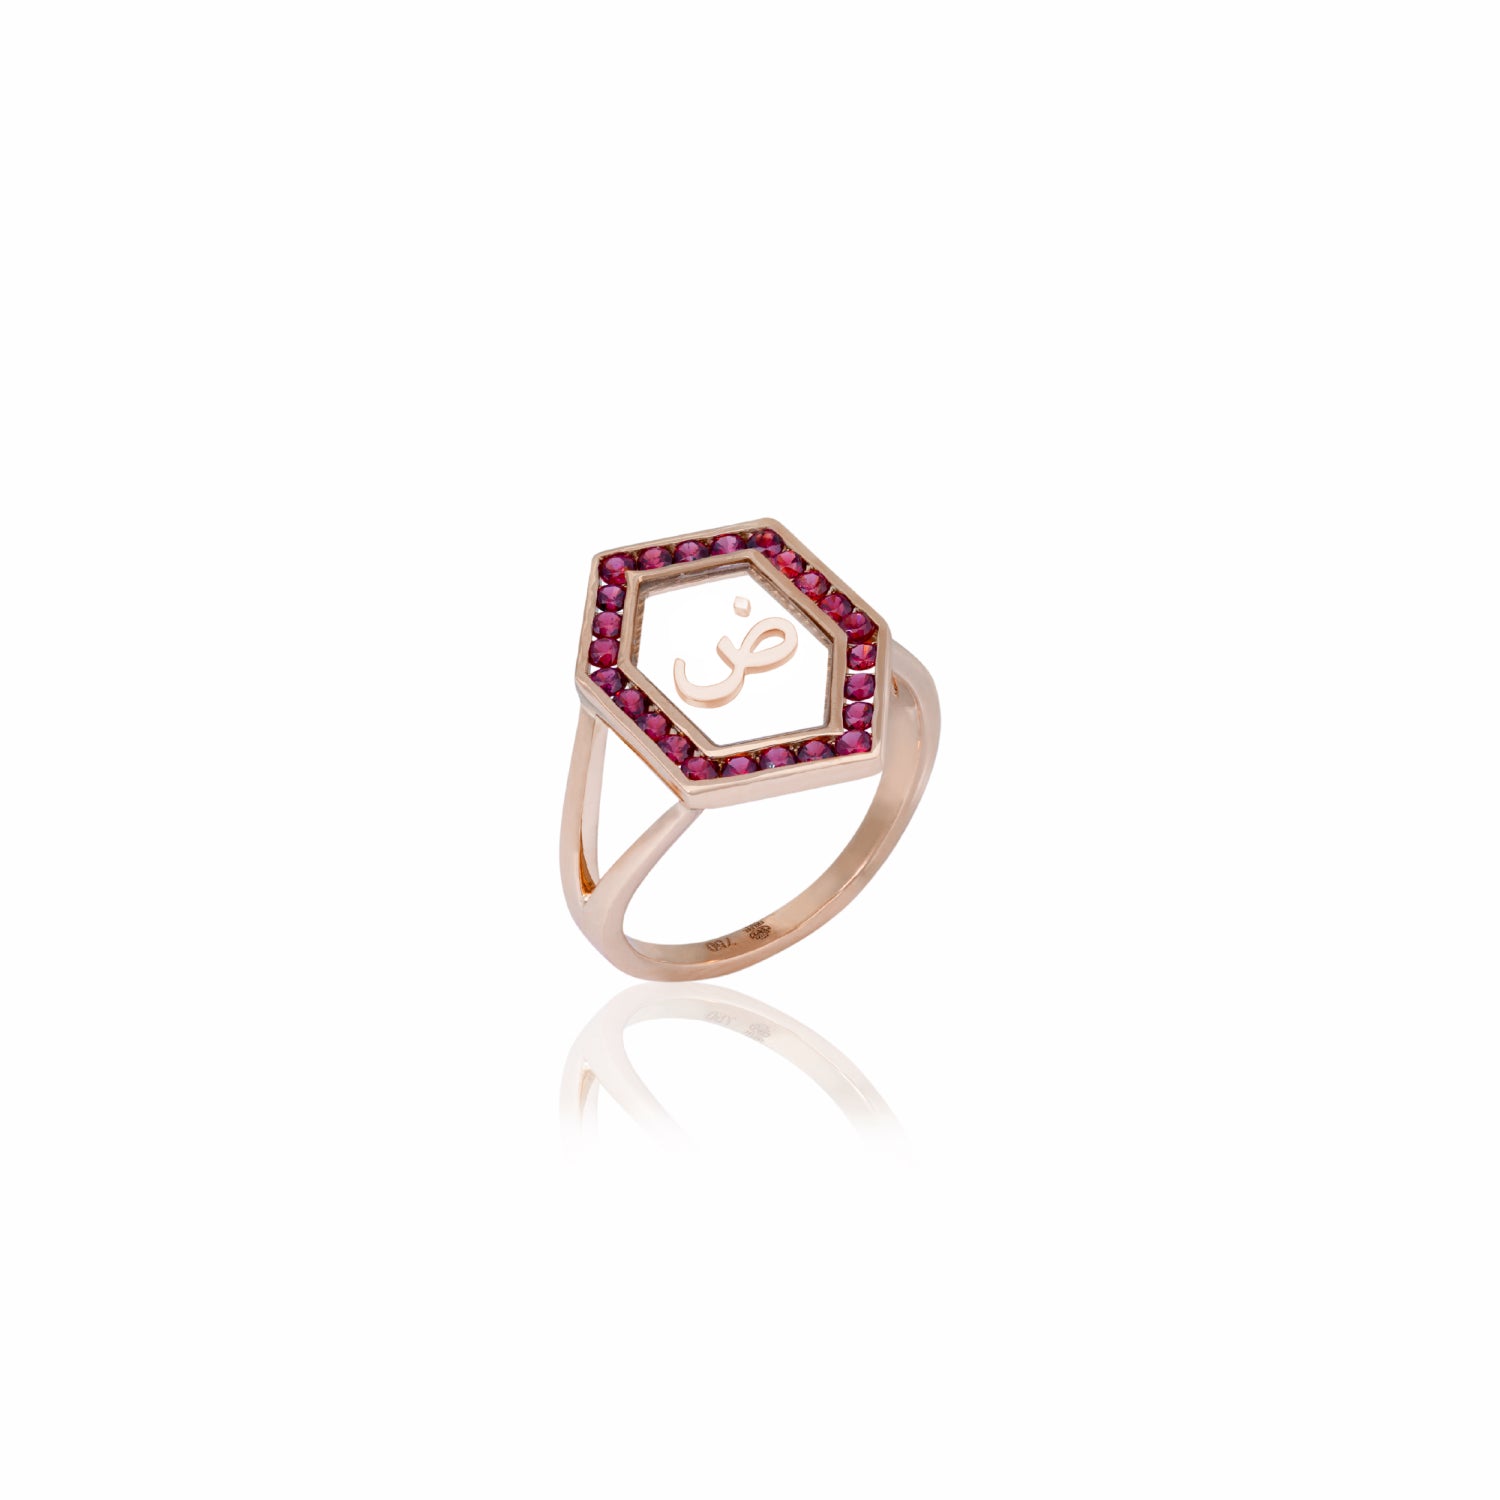 Qamoos 1.0 Letter ض Ruby Ring in Rose Gold